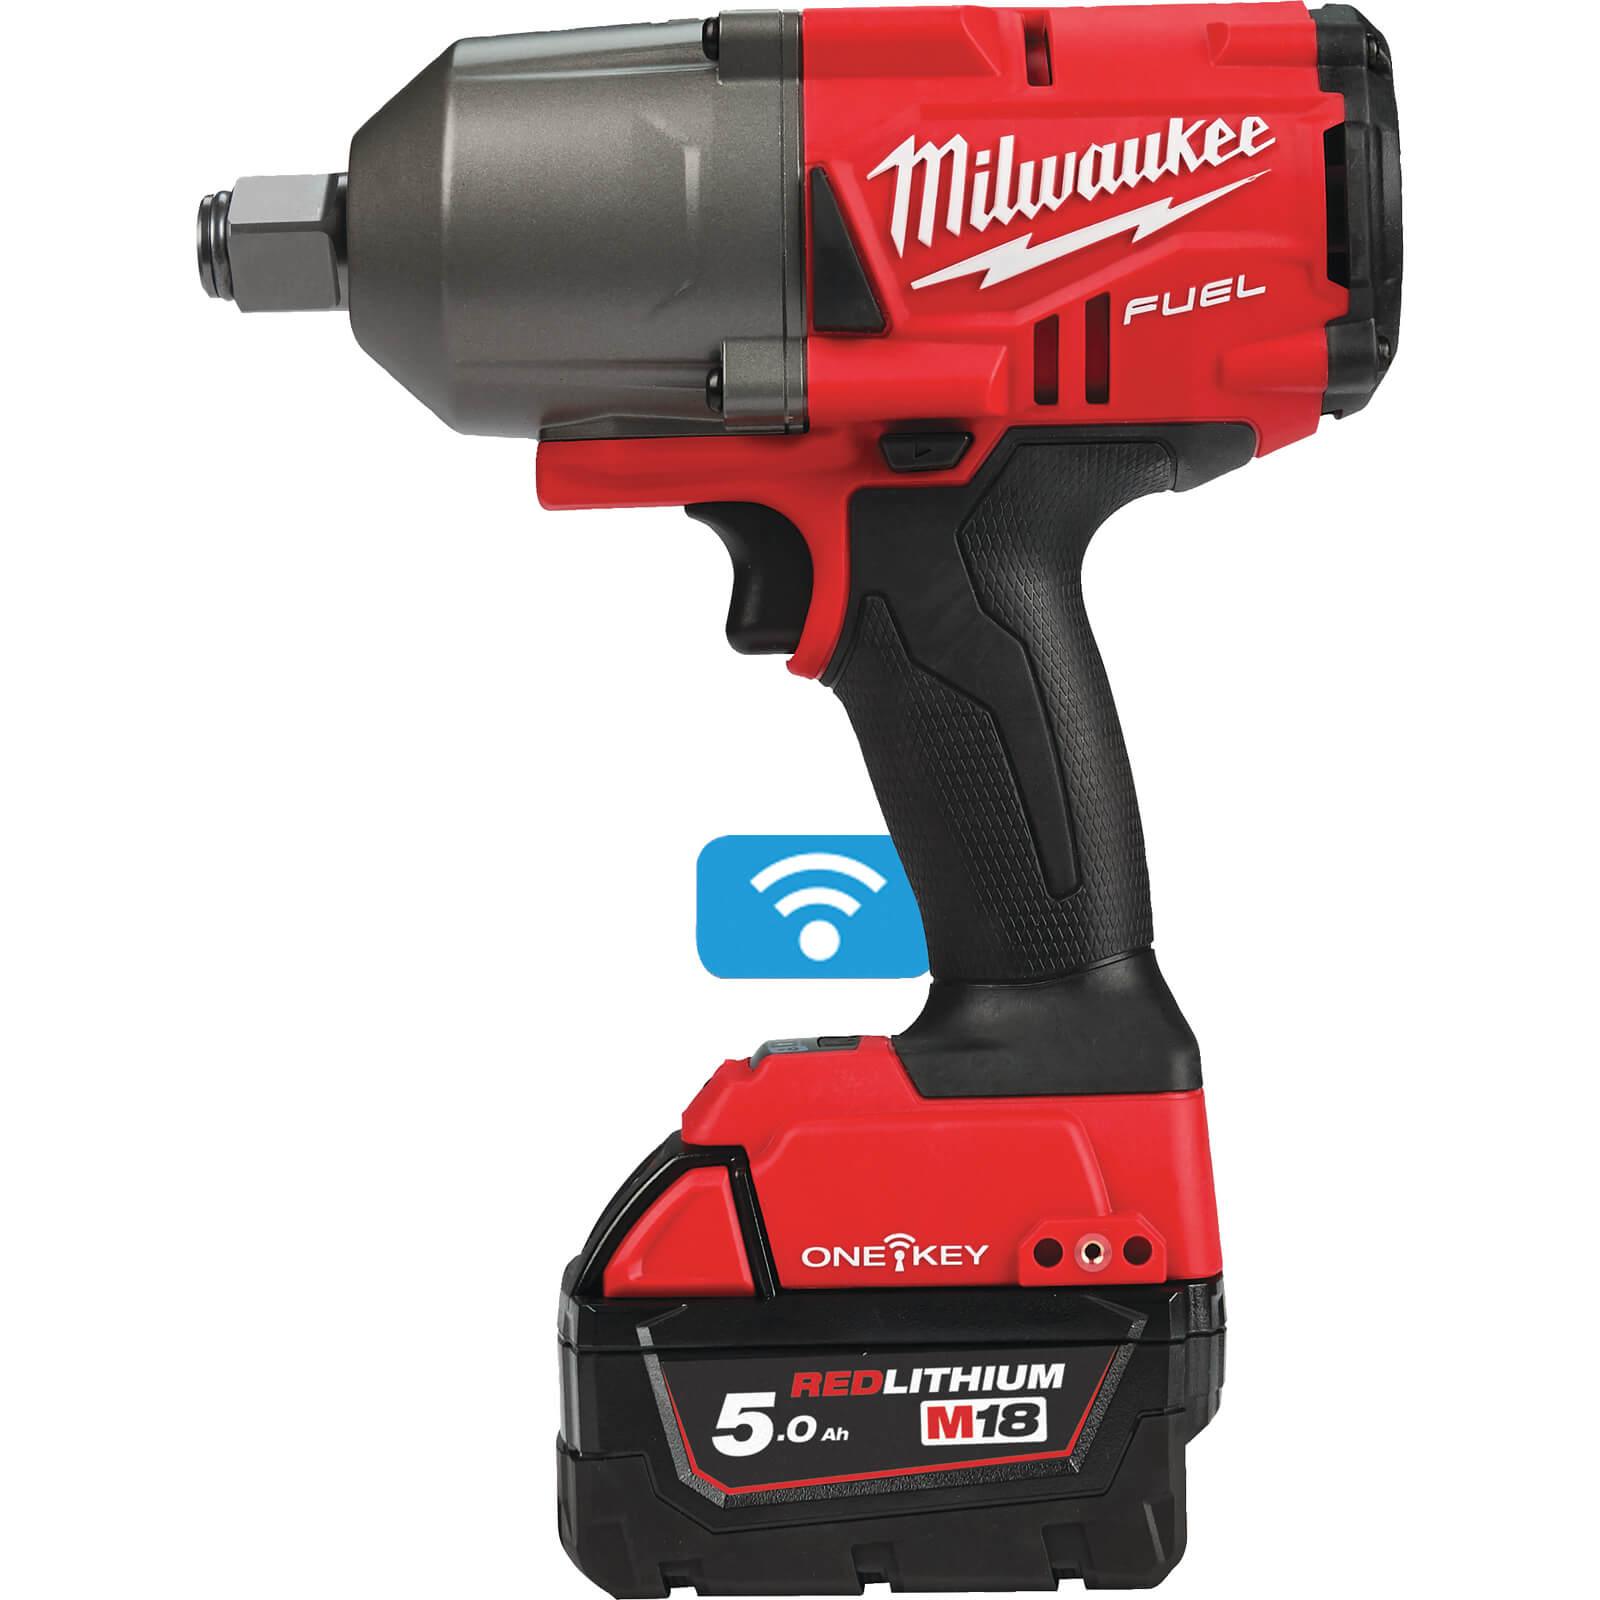 Milwaukee M18 ONEFHIWF34 Fuel 18v Cordless Brushless 3/4" Drive Impact Wrench 2 x 5ah Li-ion Charger Case